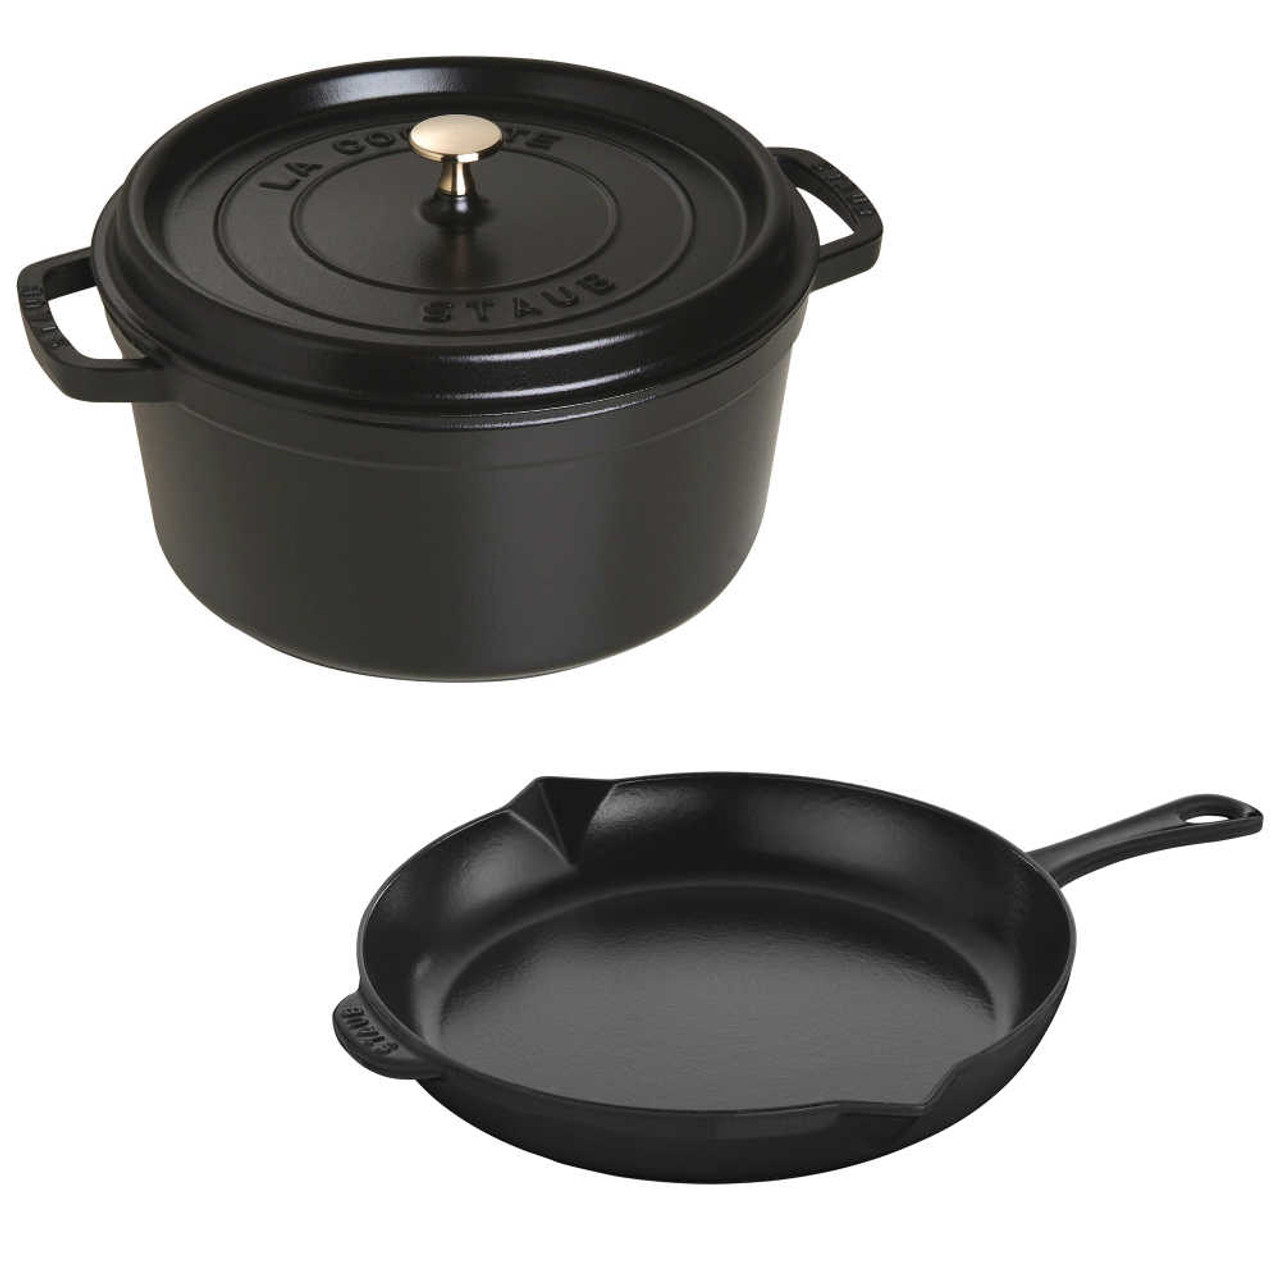 https://cdn11.bigcommerce.com/s-hccytny0od/images/stencil/1280x1280/products/5784/25643/Staub_Cast_Iron_Cocotte_and_Fry_Pan_Set_Matte_Black__58709.1696526599.jpg?c=2?imbypass=on